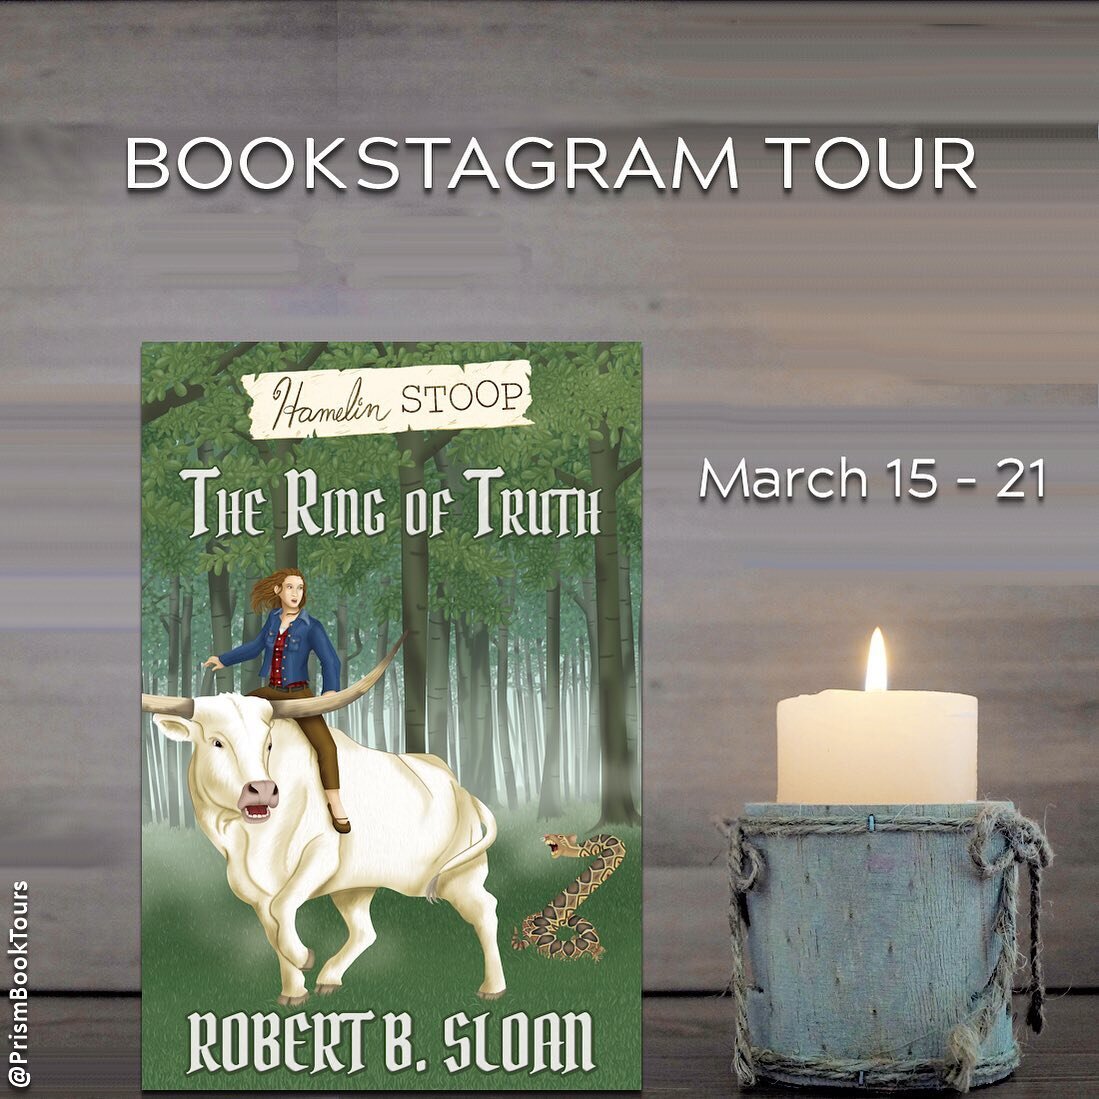 Want to be part of a bookstagram tour for Hamelin Stoop: The Ring of Truth? You can sign up today with @prismbooktours 
&bull;
&bull;
&bull;
#hamelinstoop #hamelinstoopseries #bookstagram #bookstagramcommunity #yafantasy #yafantasybooks 
&bull;
&bull